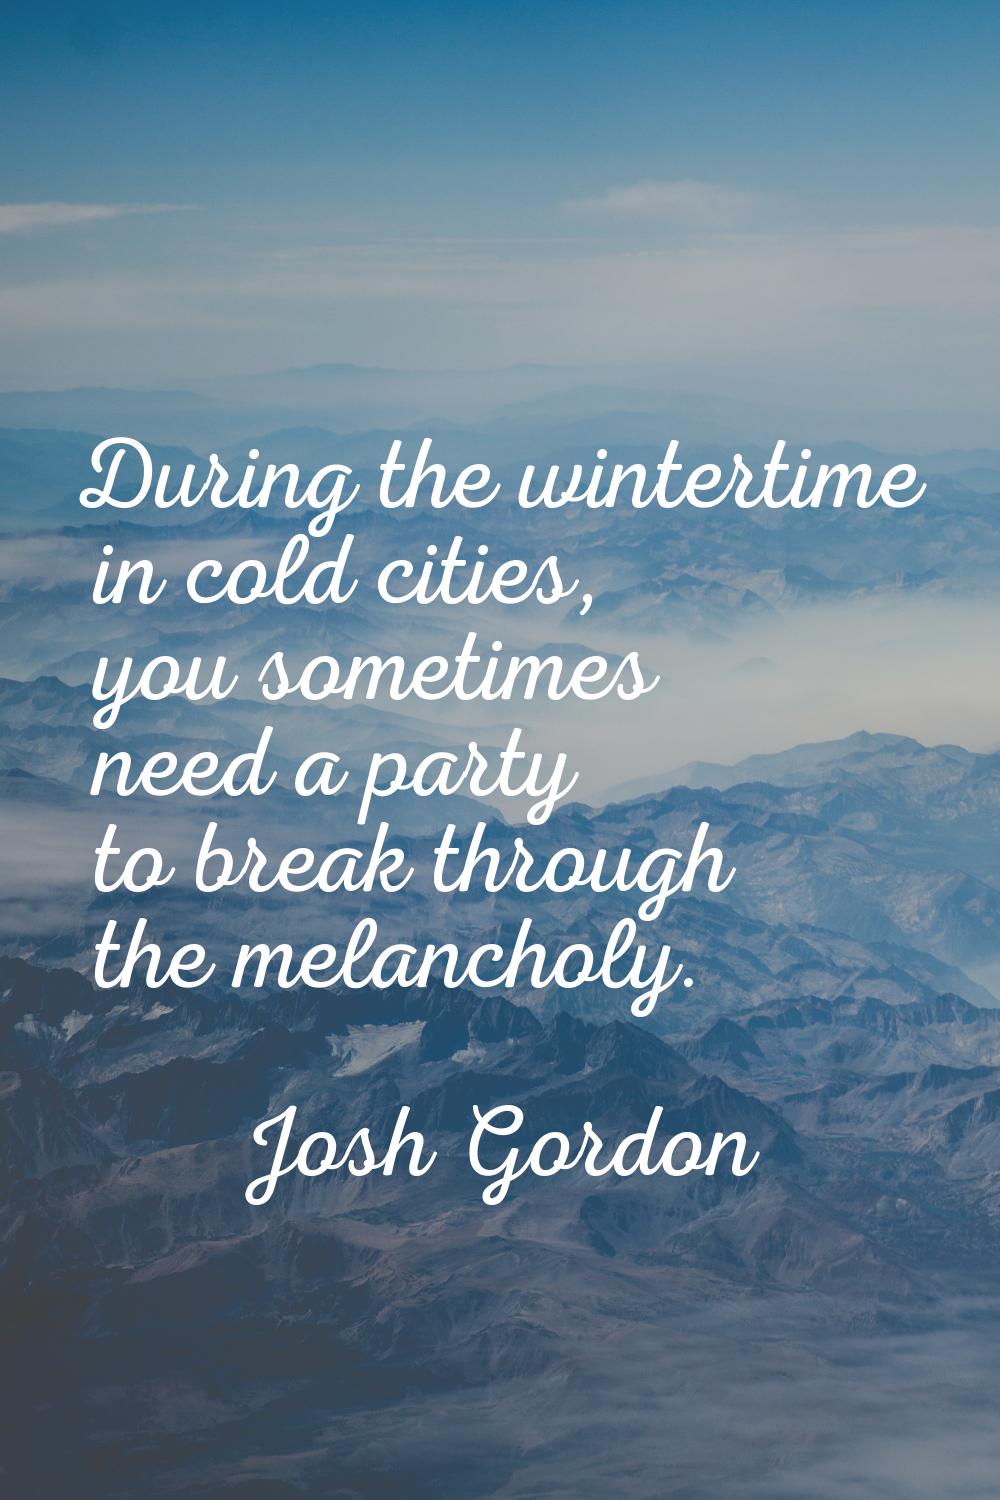 During the wintertime in cold cities, you sometimes need a party to break through the melancholy.